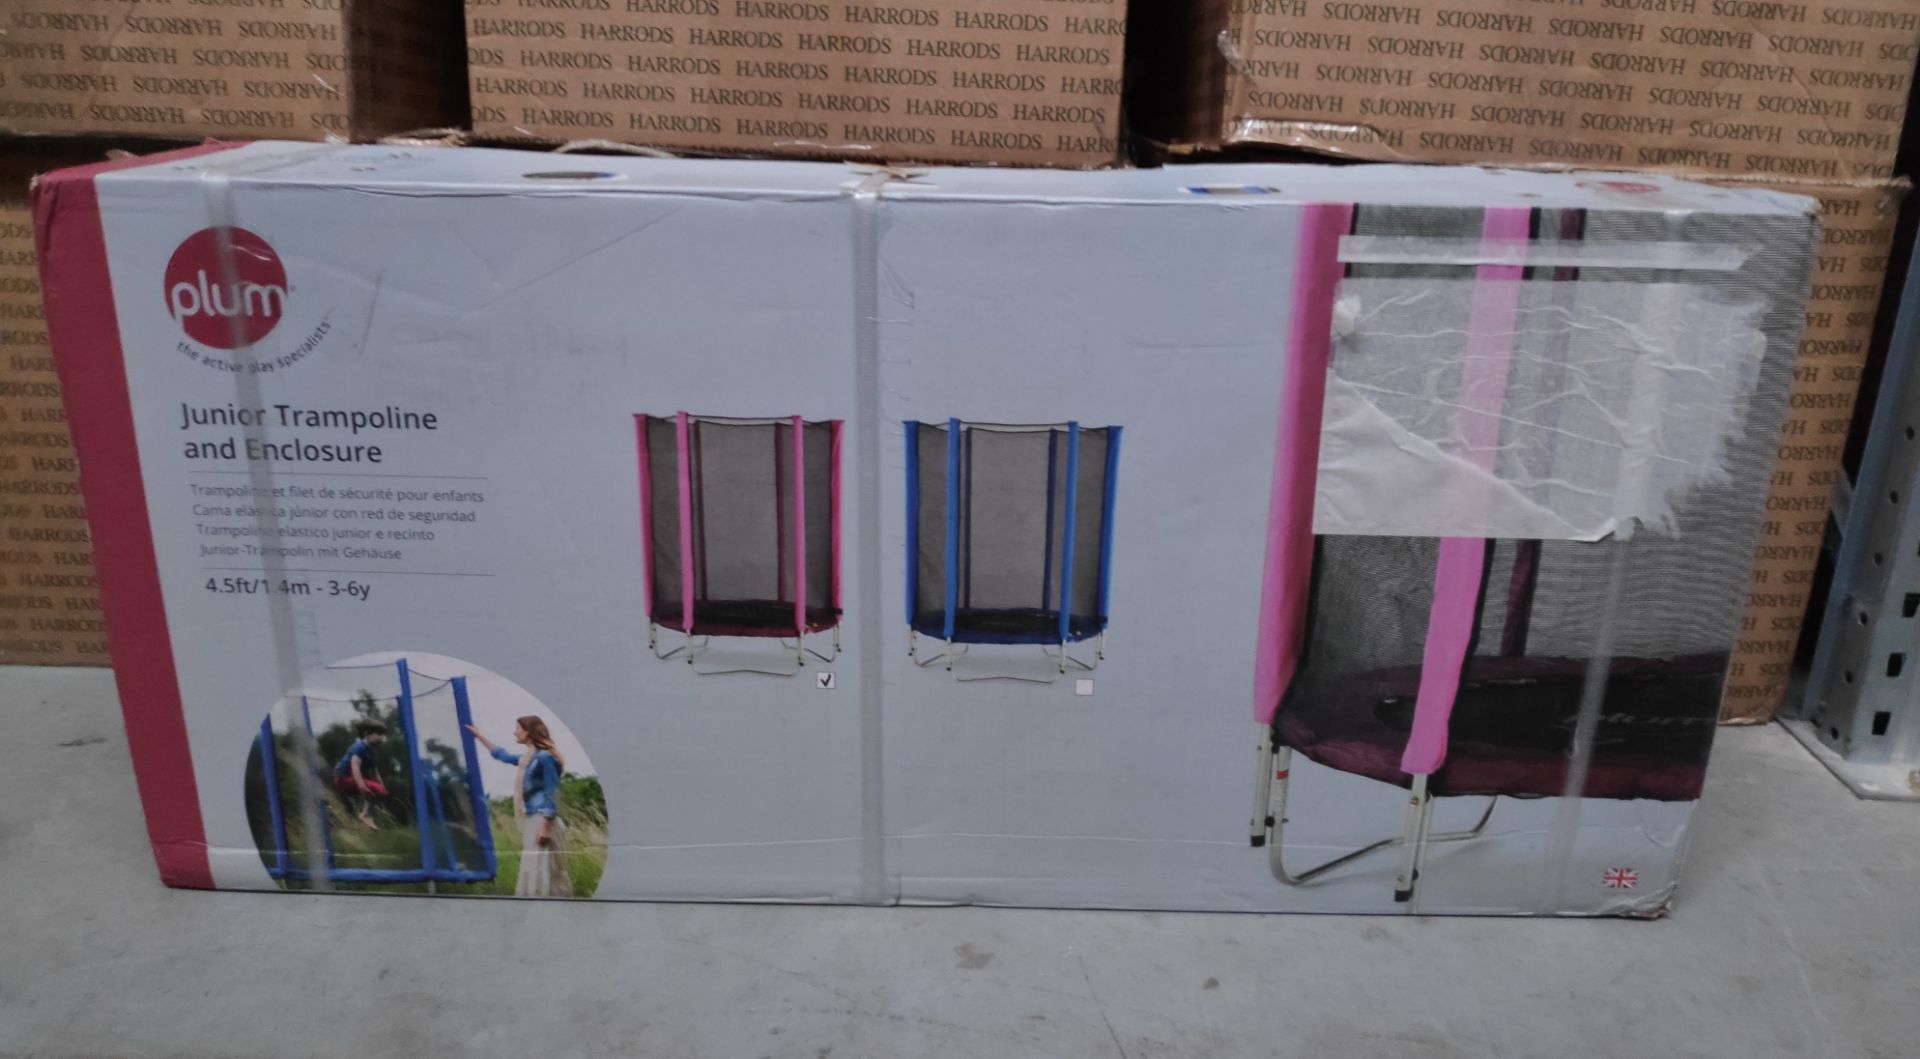 1 x Plum 1.4m Junior Trampoline and Enclosure in Pink - New/Boxed